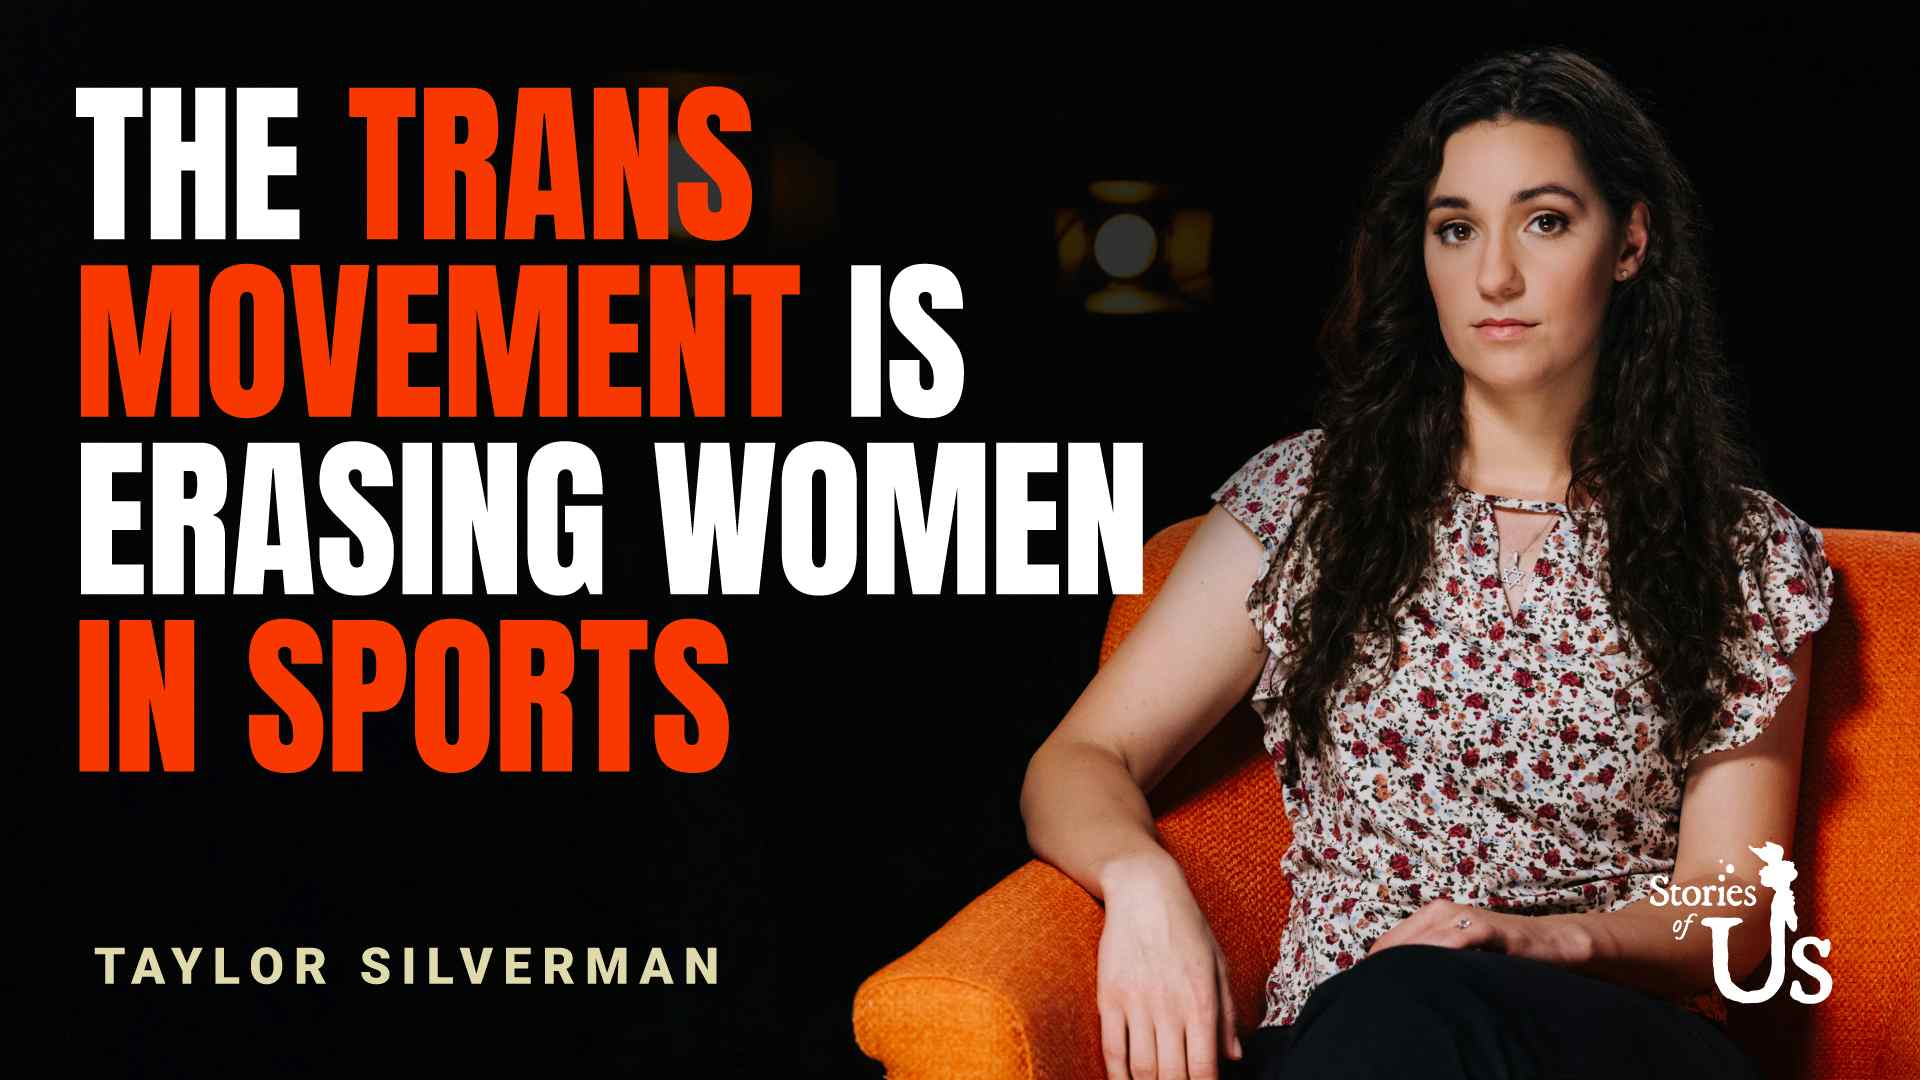 Taylor Silverman: The Trans Movement Is Erasing Women in Sports